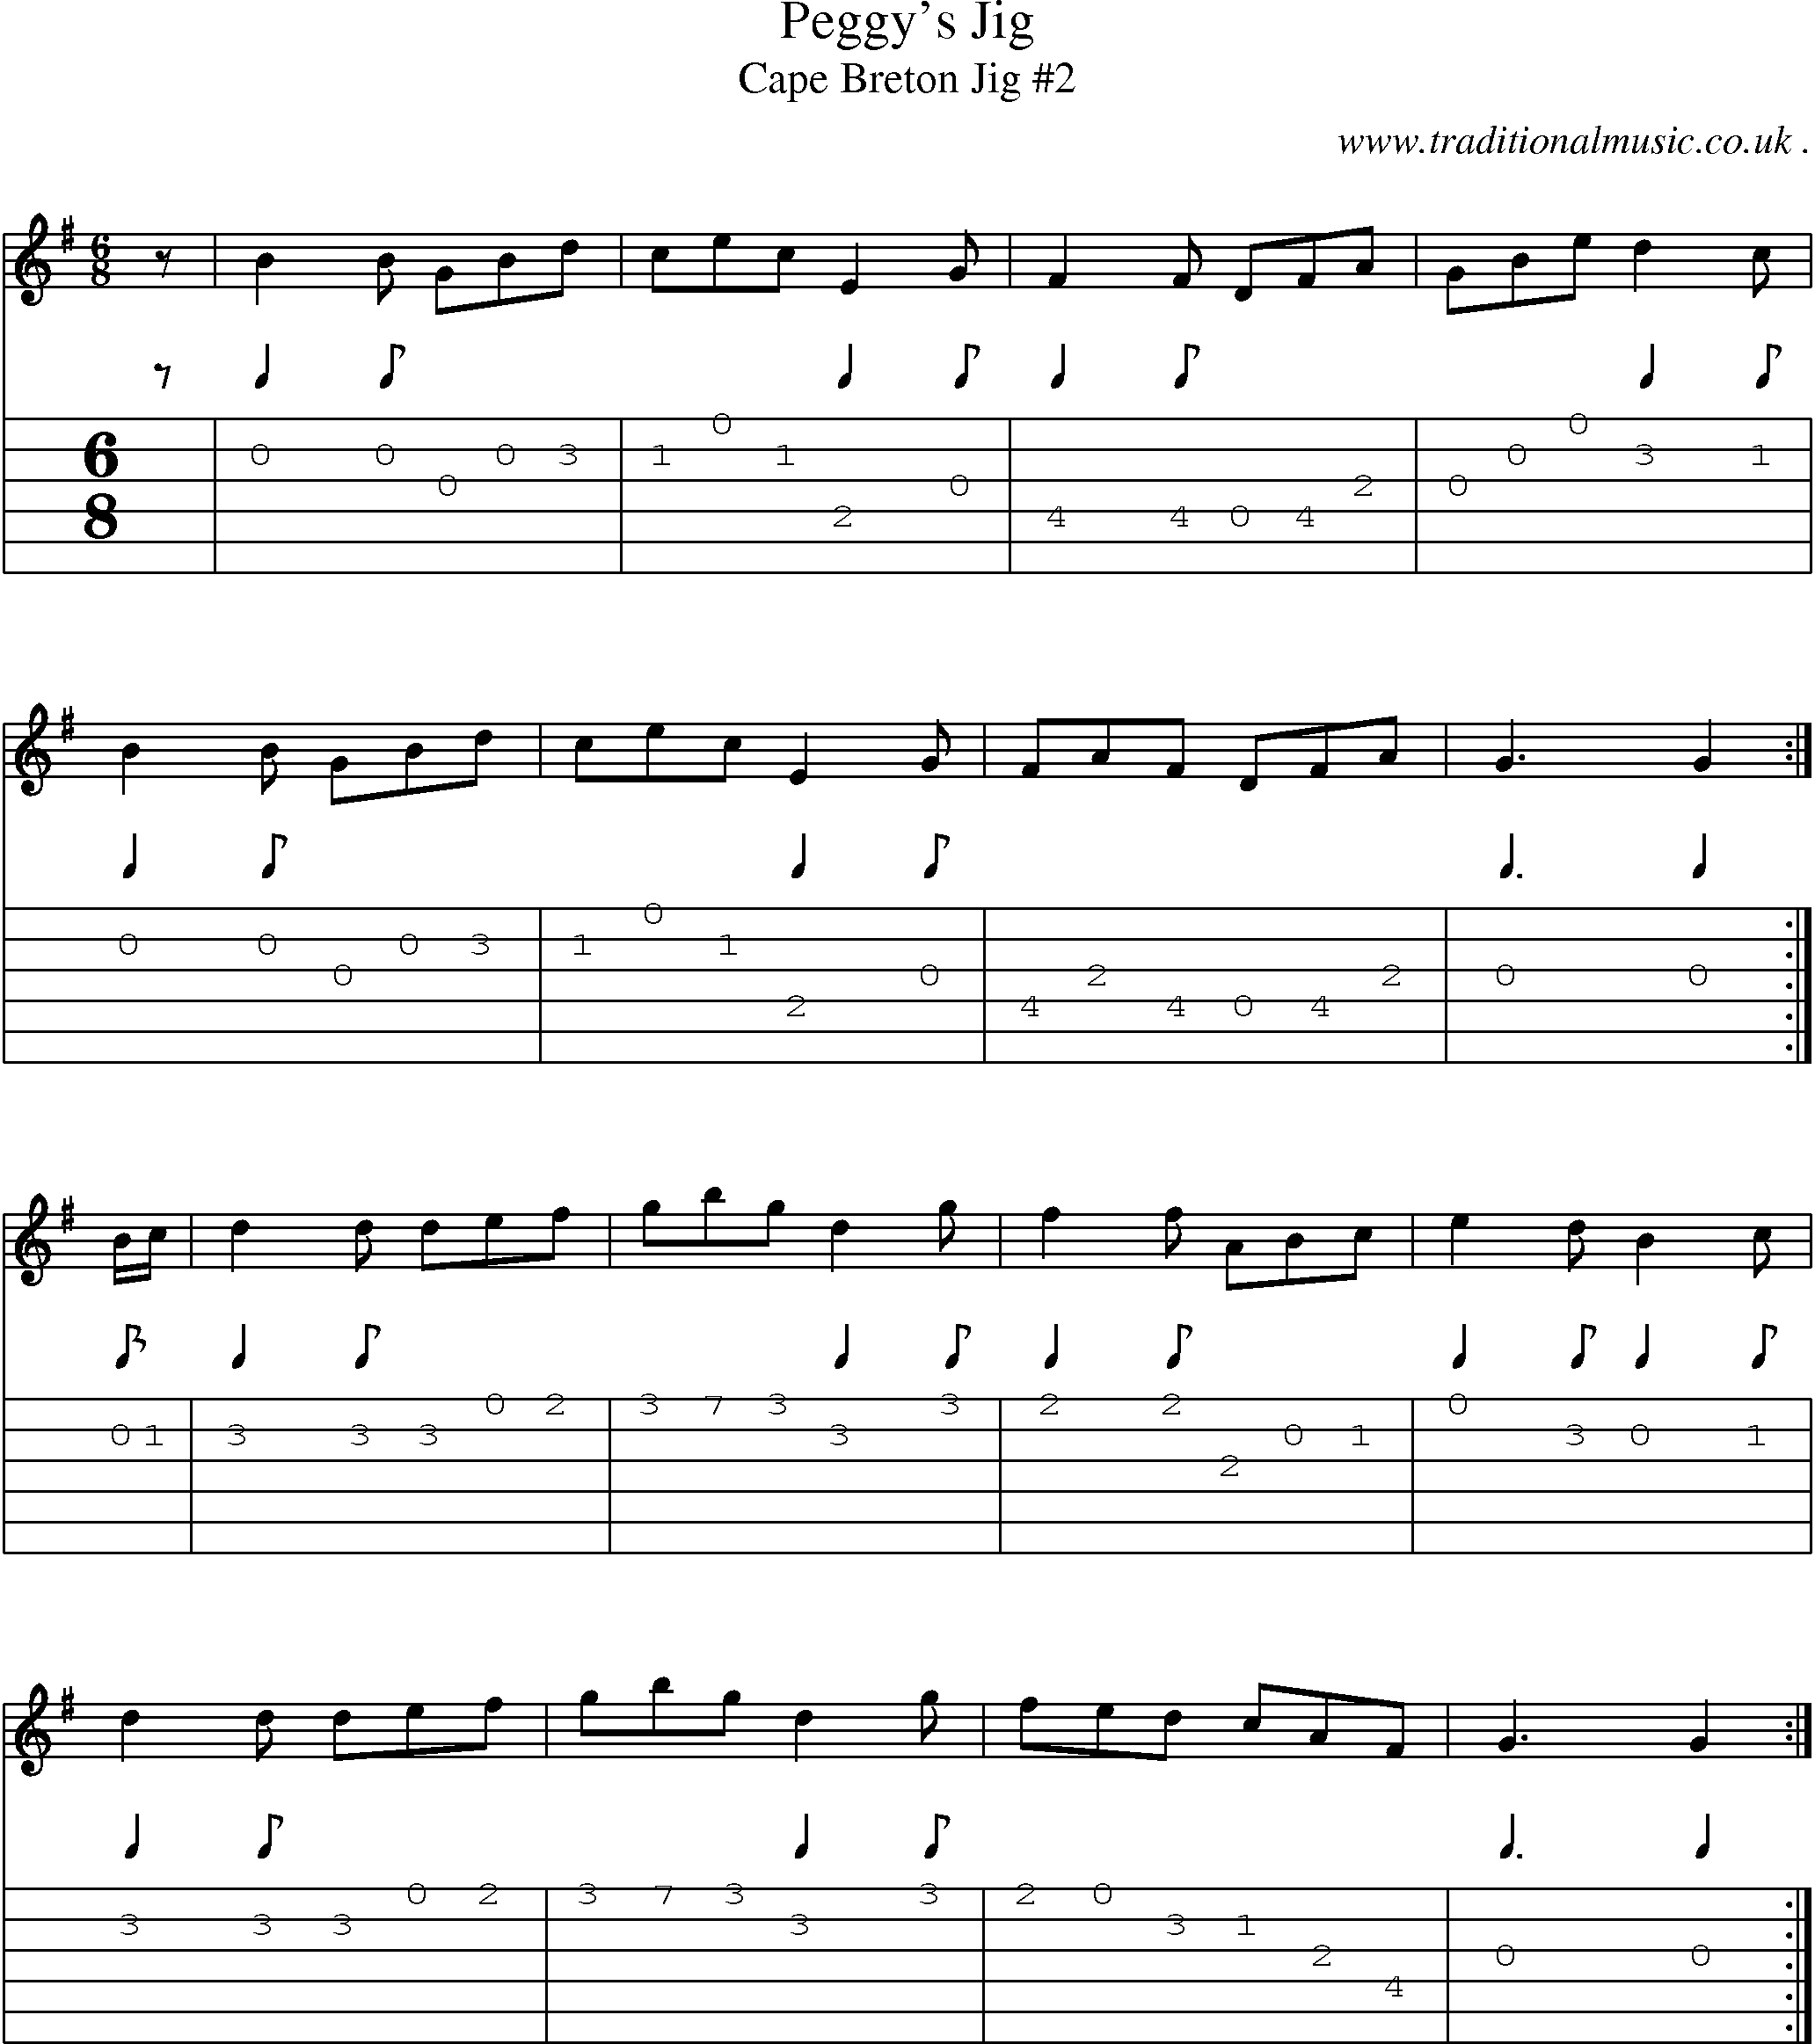 Sheet-music  score, Chords and Guitar Tabs for Peggys Jig